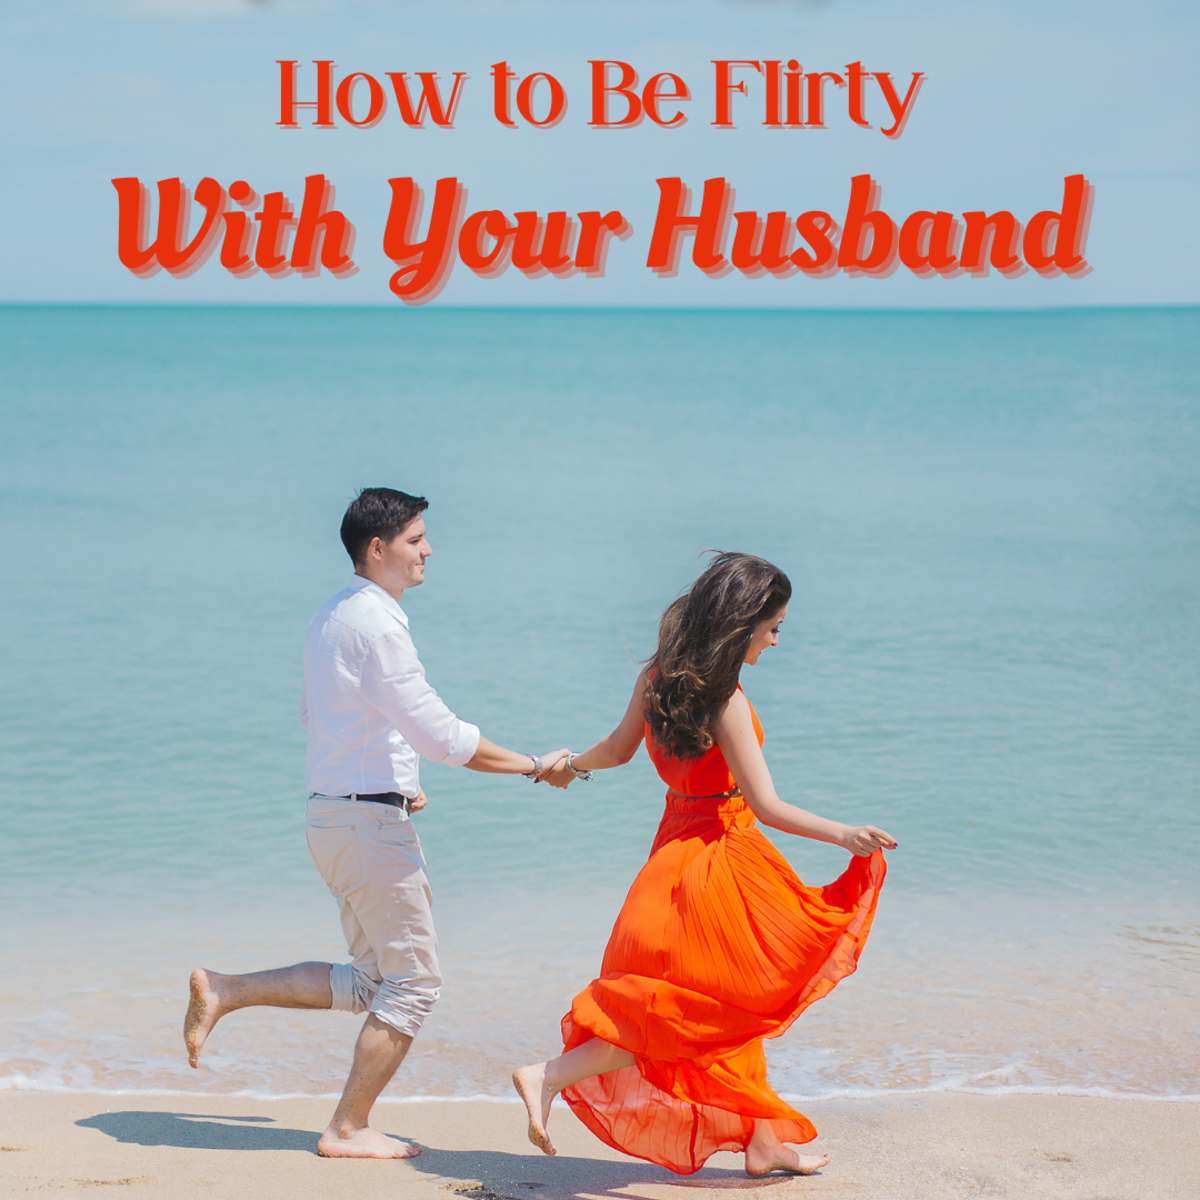 Keep the romance alive by flirting with your hubby!